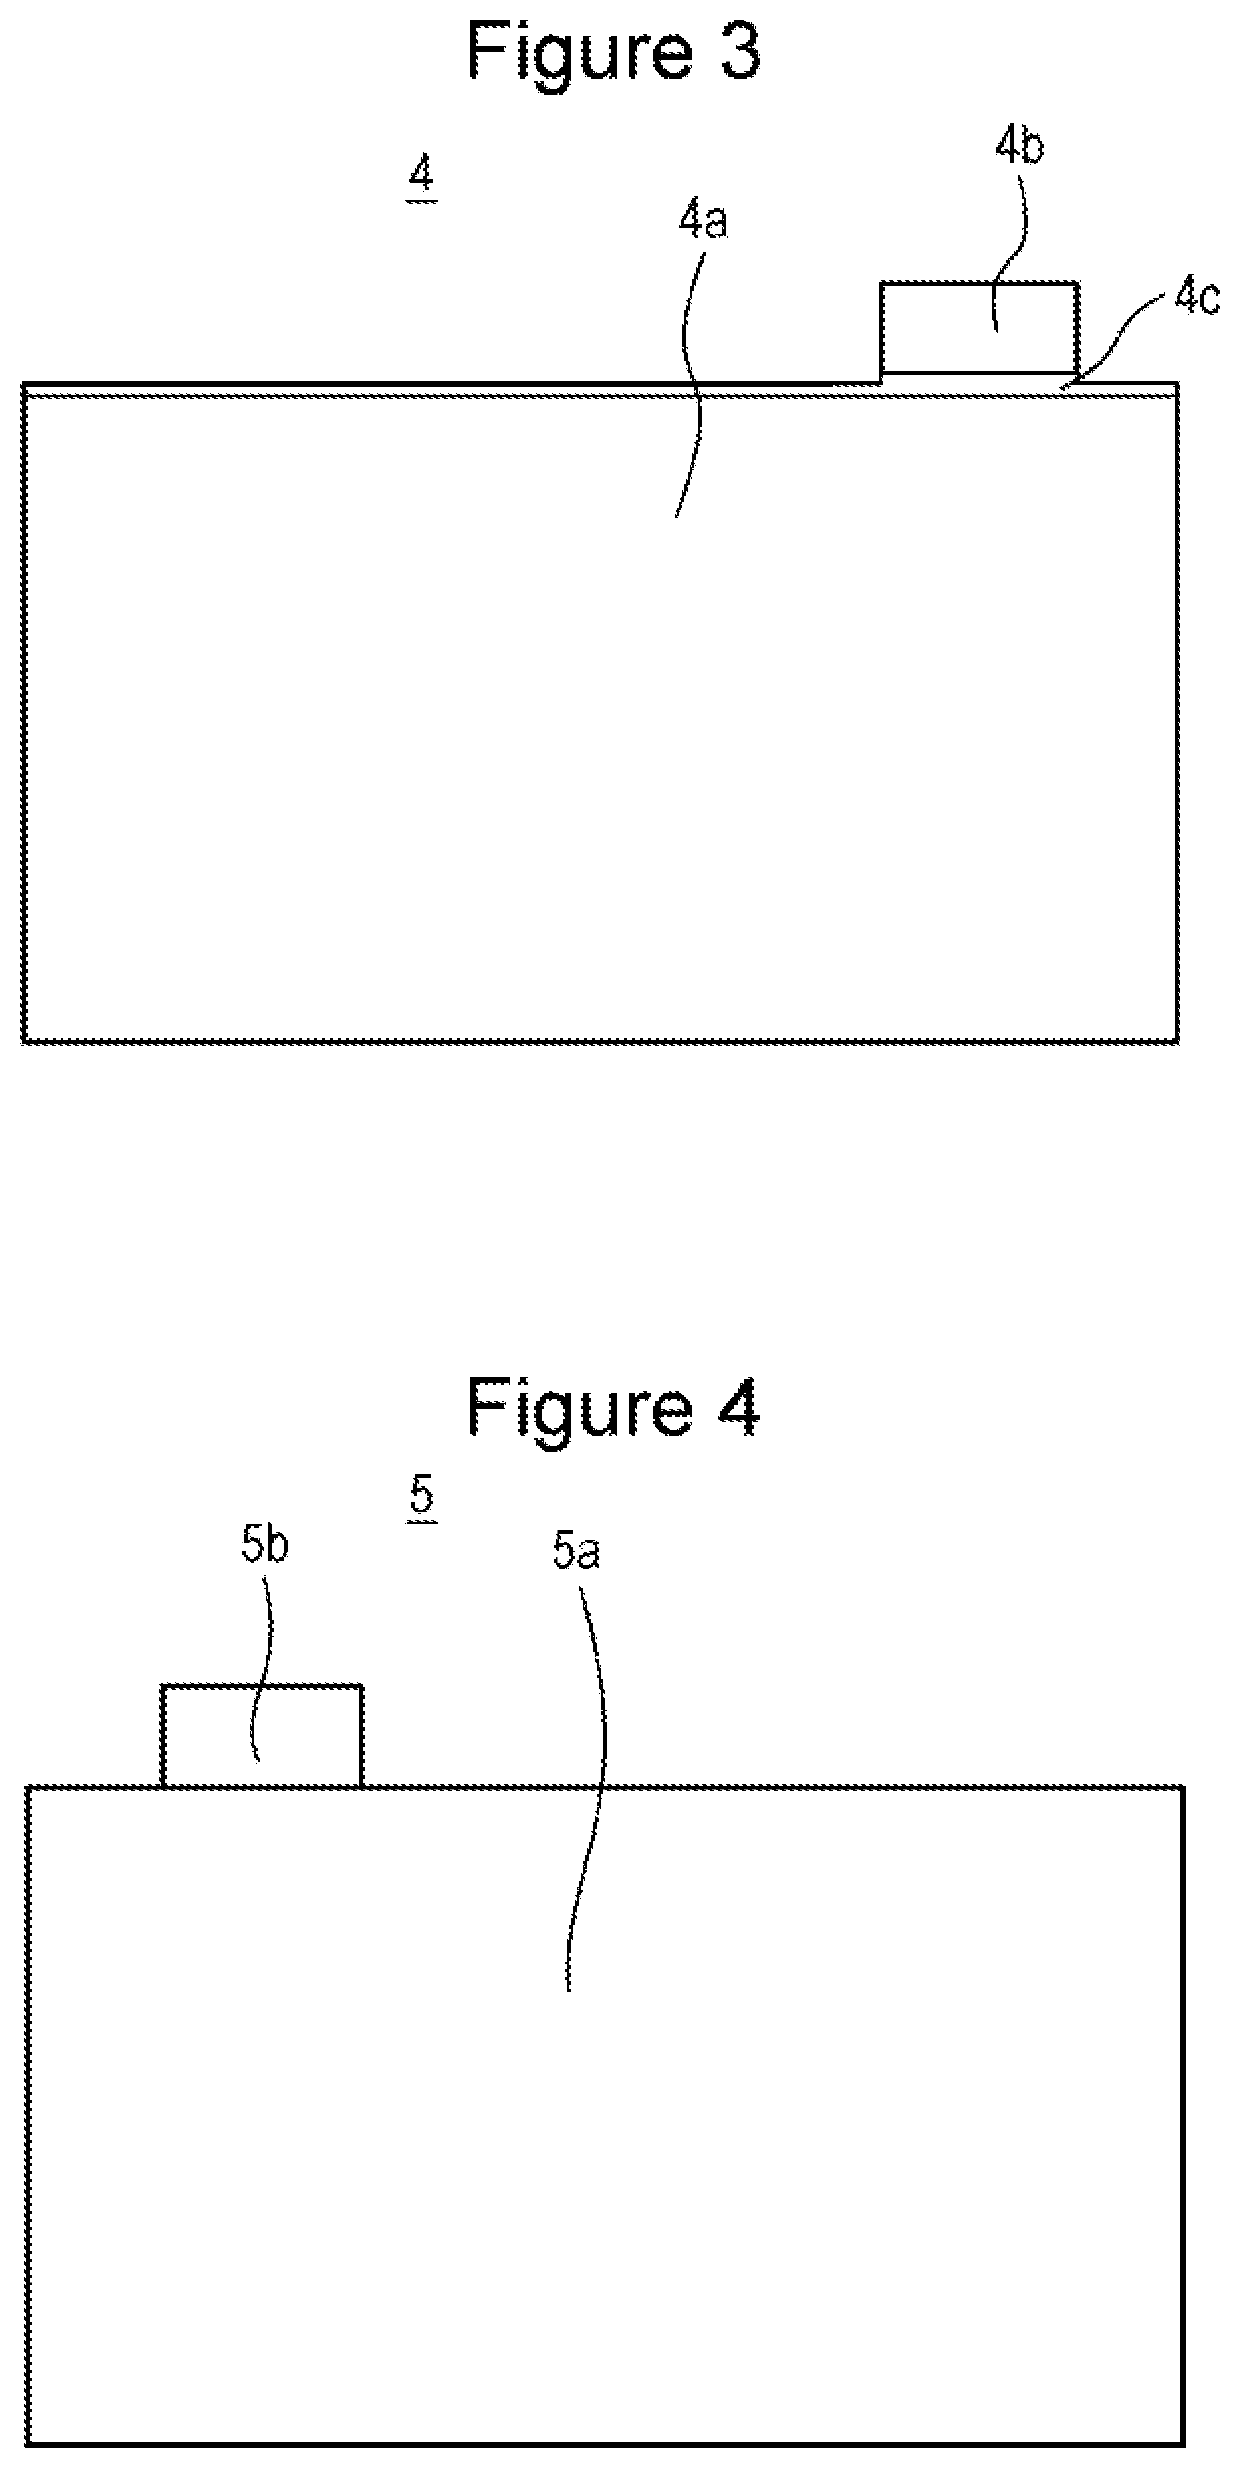 Rectangular secondary battery and method of manufacturing the same